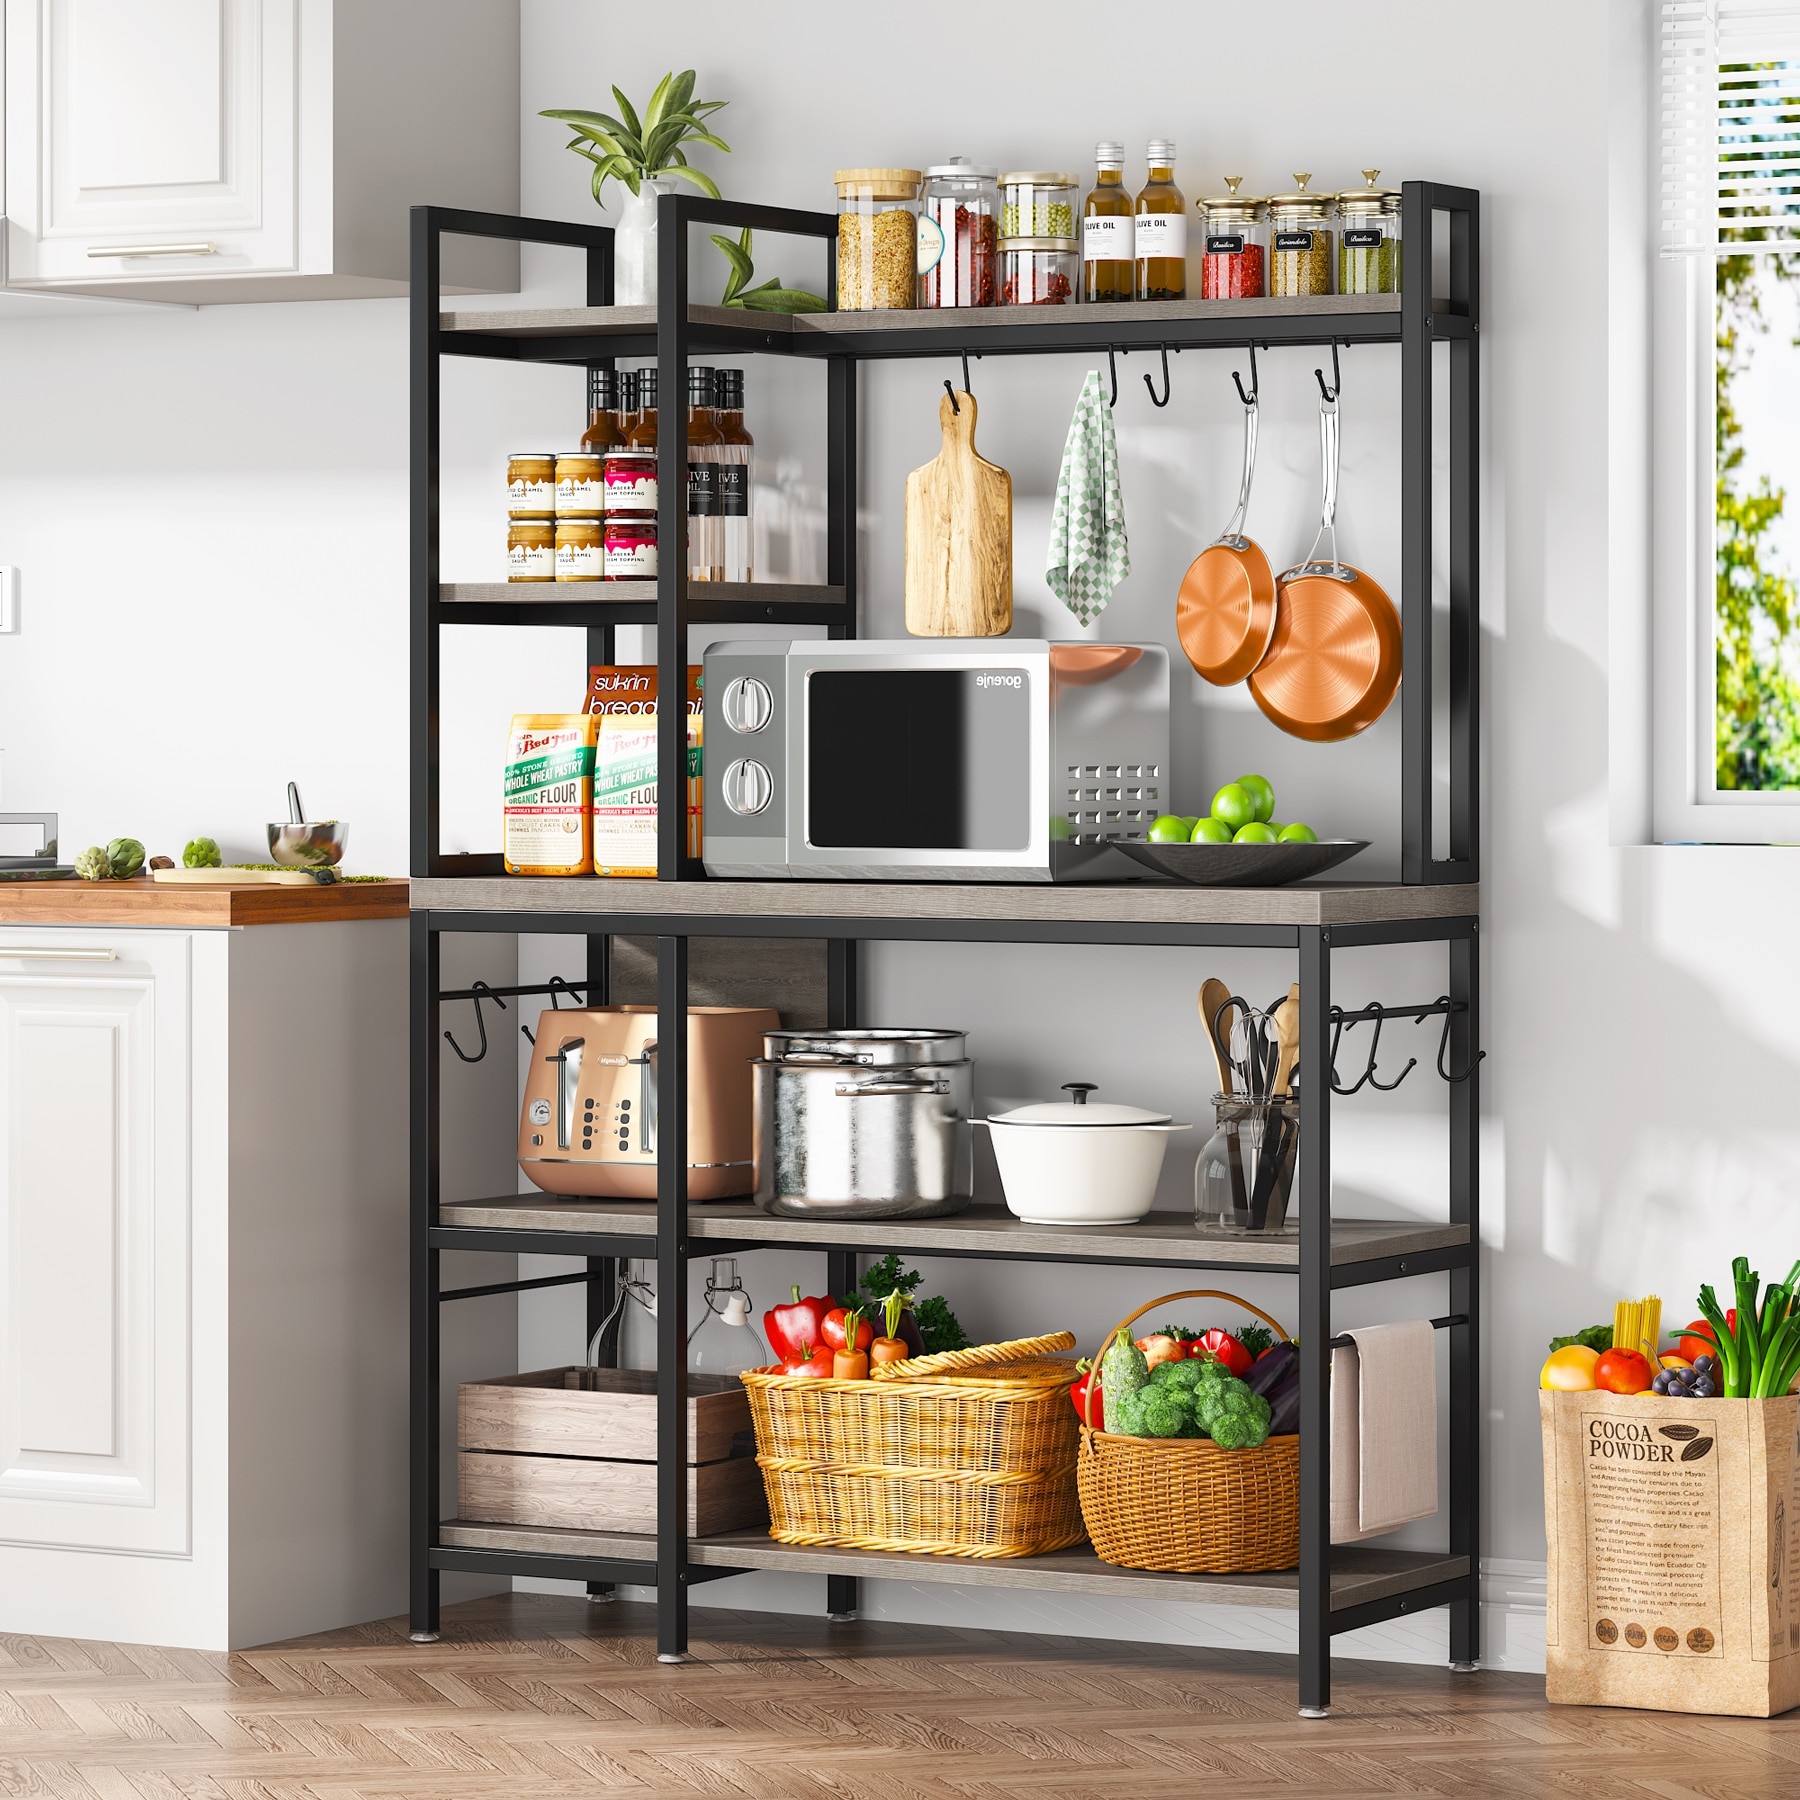 https://ak1.ostkcdn.com/images/products/is/images/direct/8b7da4f903da58f676dadf8693595ce235ddd161/Brown-Industrial-Wood-Bakers-Rack-with-Storage%2CBlack-Modern-Microwave-Oven-Stand%2C5-Tier-Kitchen-Utility-Storage-Shelf.jpg